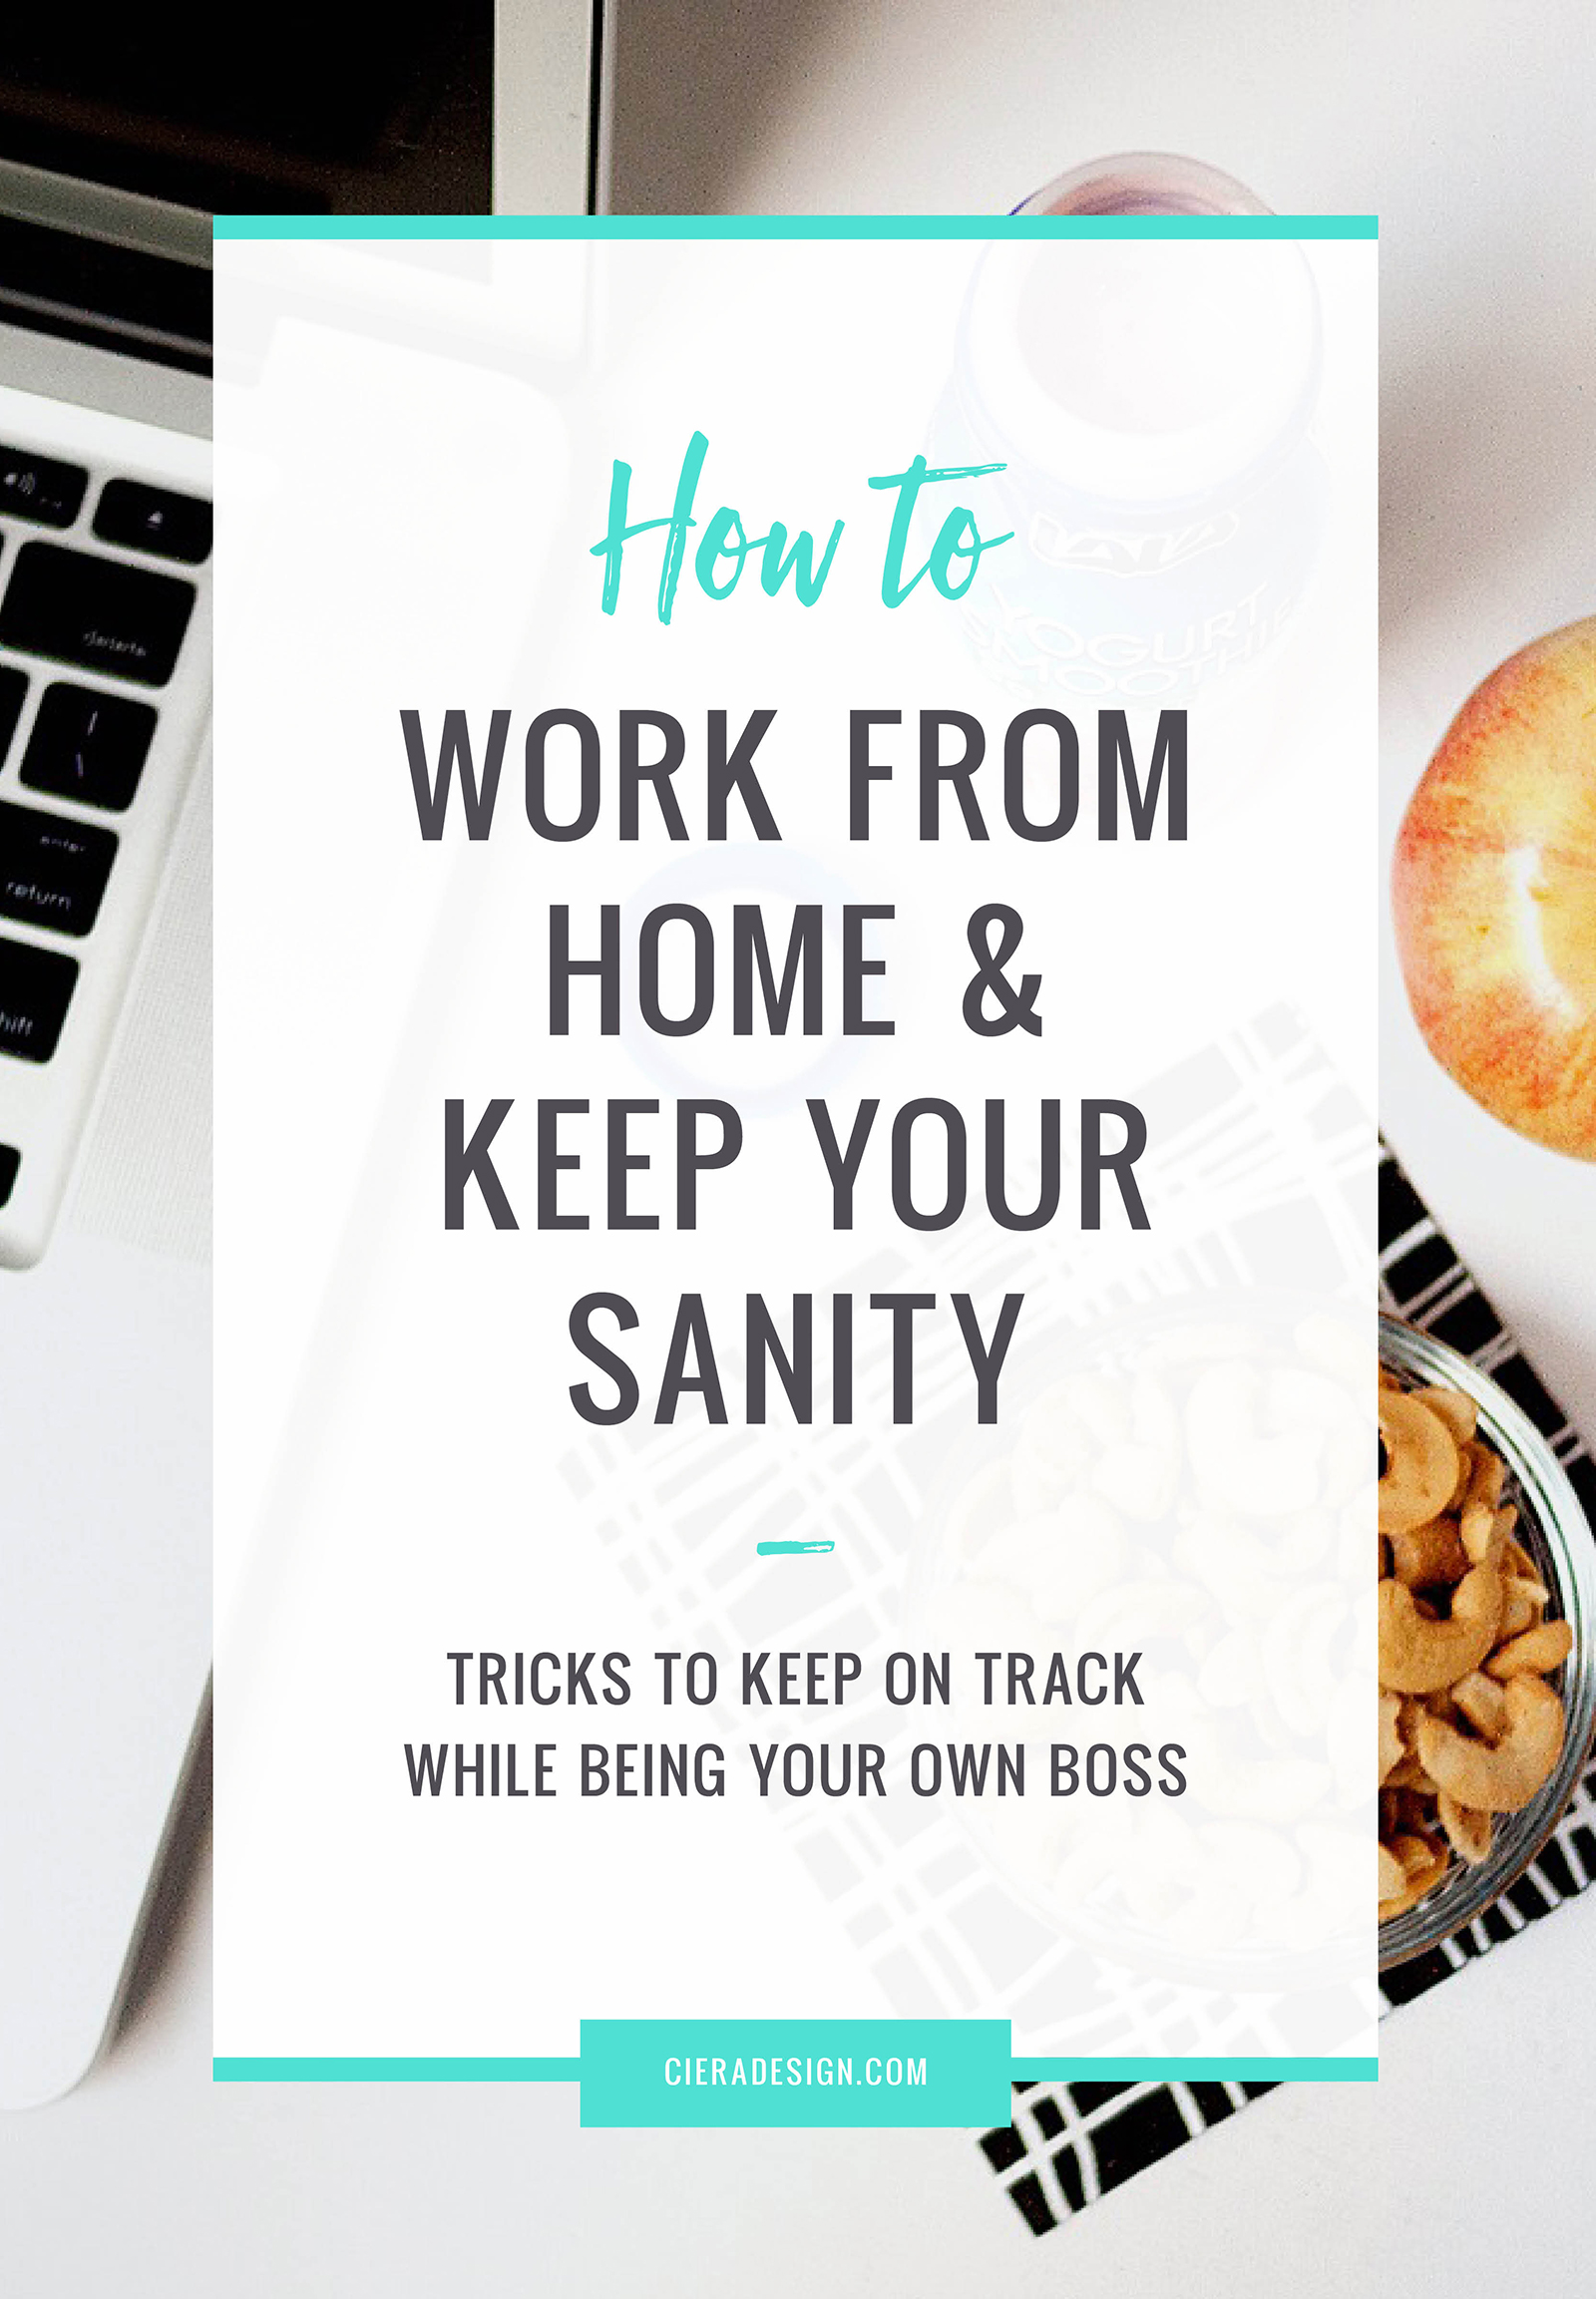 Tricks to keep on track while being your own boss and working from home.